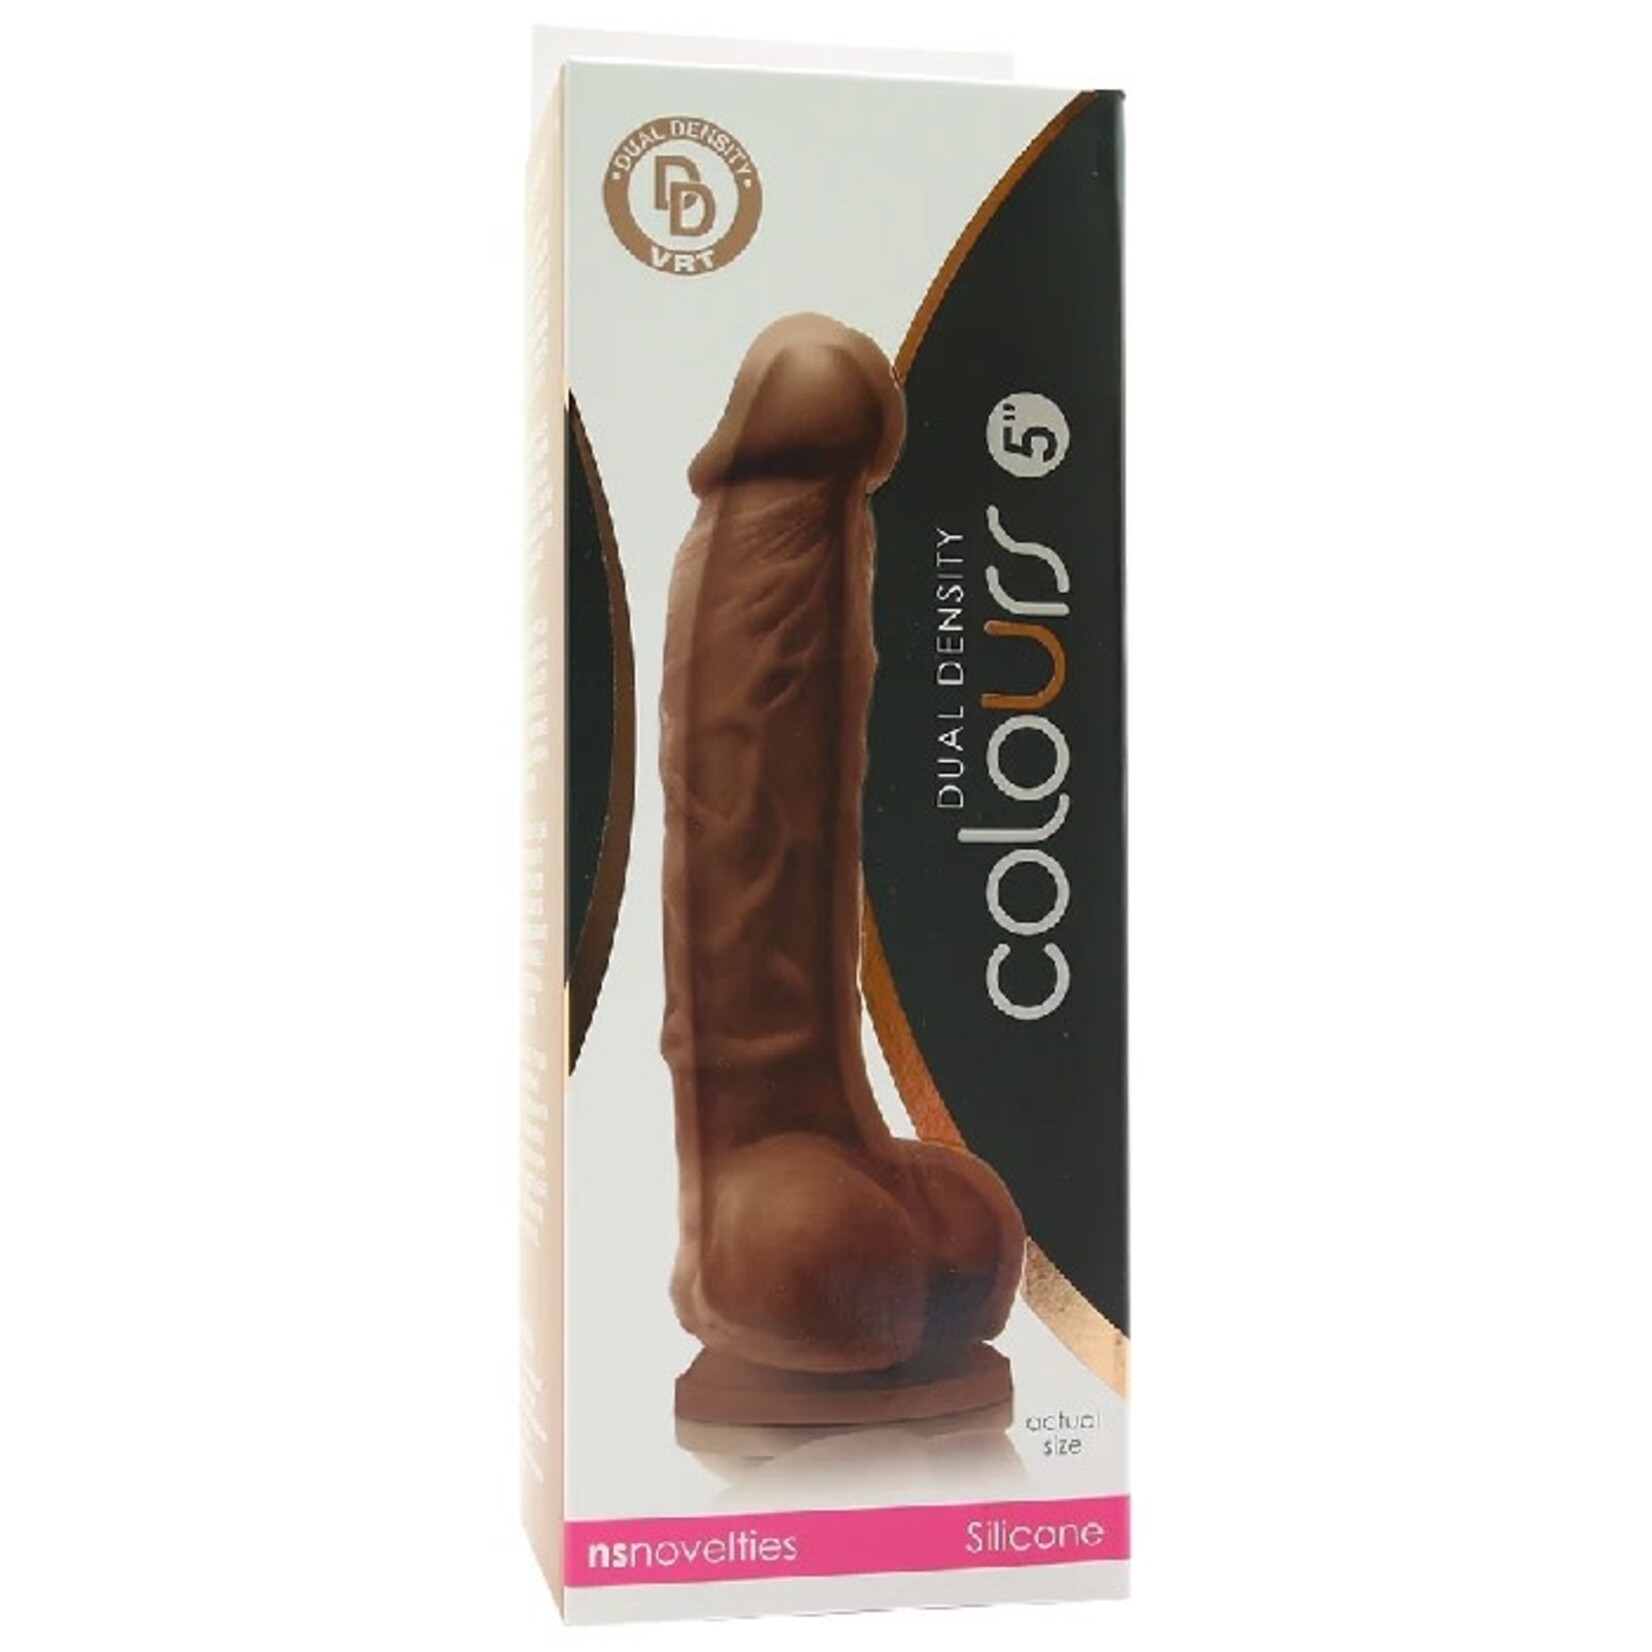 NSNOVELTIES COLOURS 5 INCH DUAL DENSITY SILICONE DILDO IN BROWN